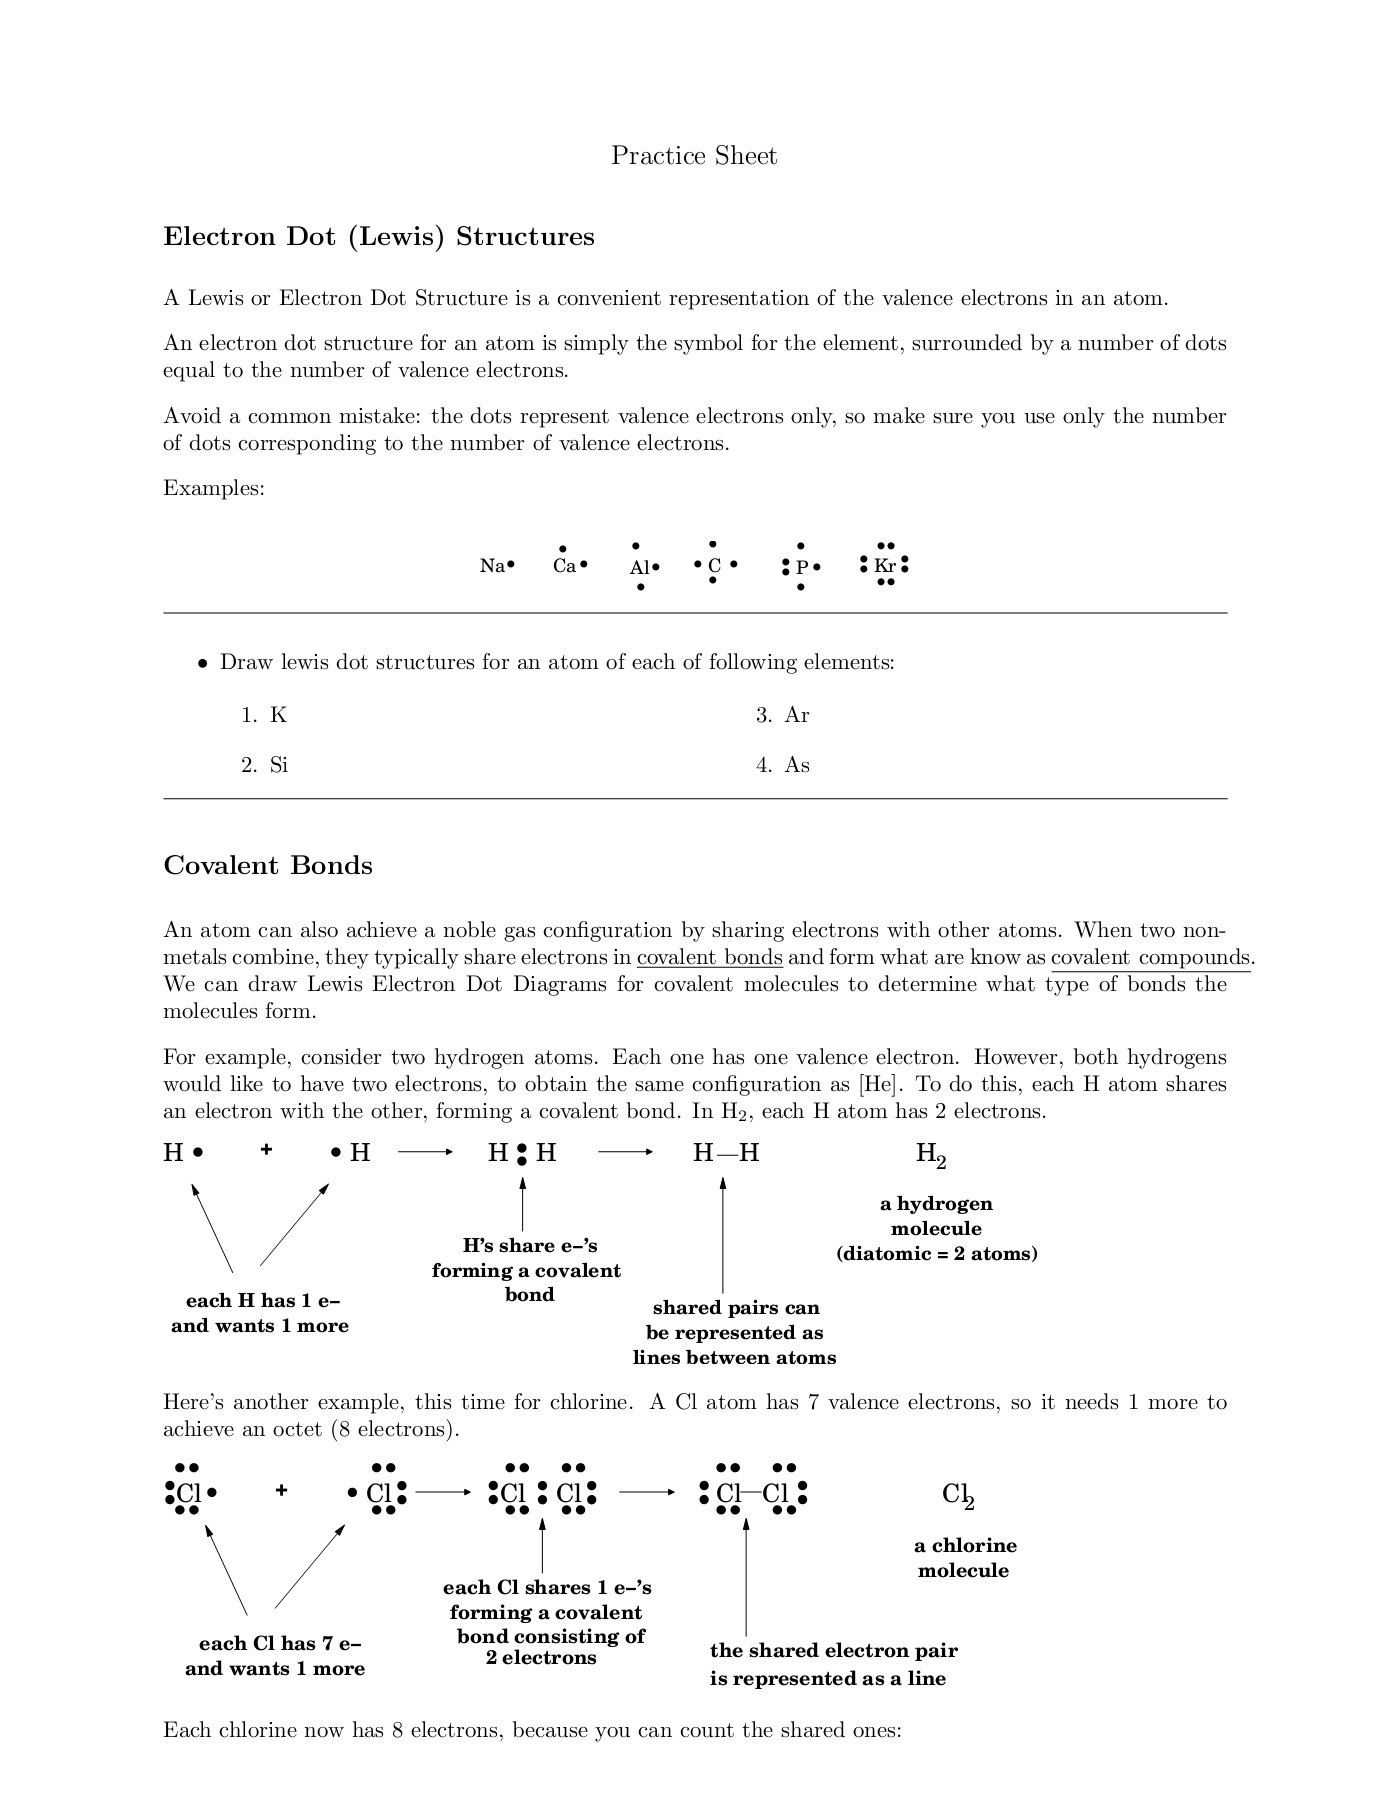 Drawing Lewis Structures Worksheet Electron Dot Lewis Structures Pages 1 4 Text Version